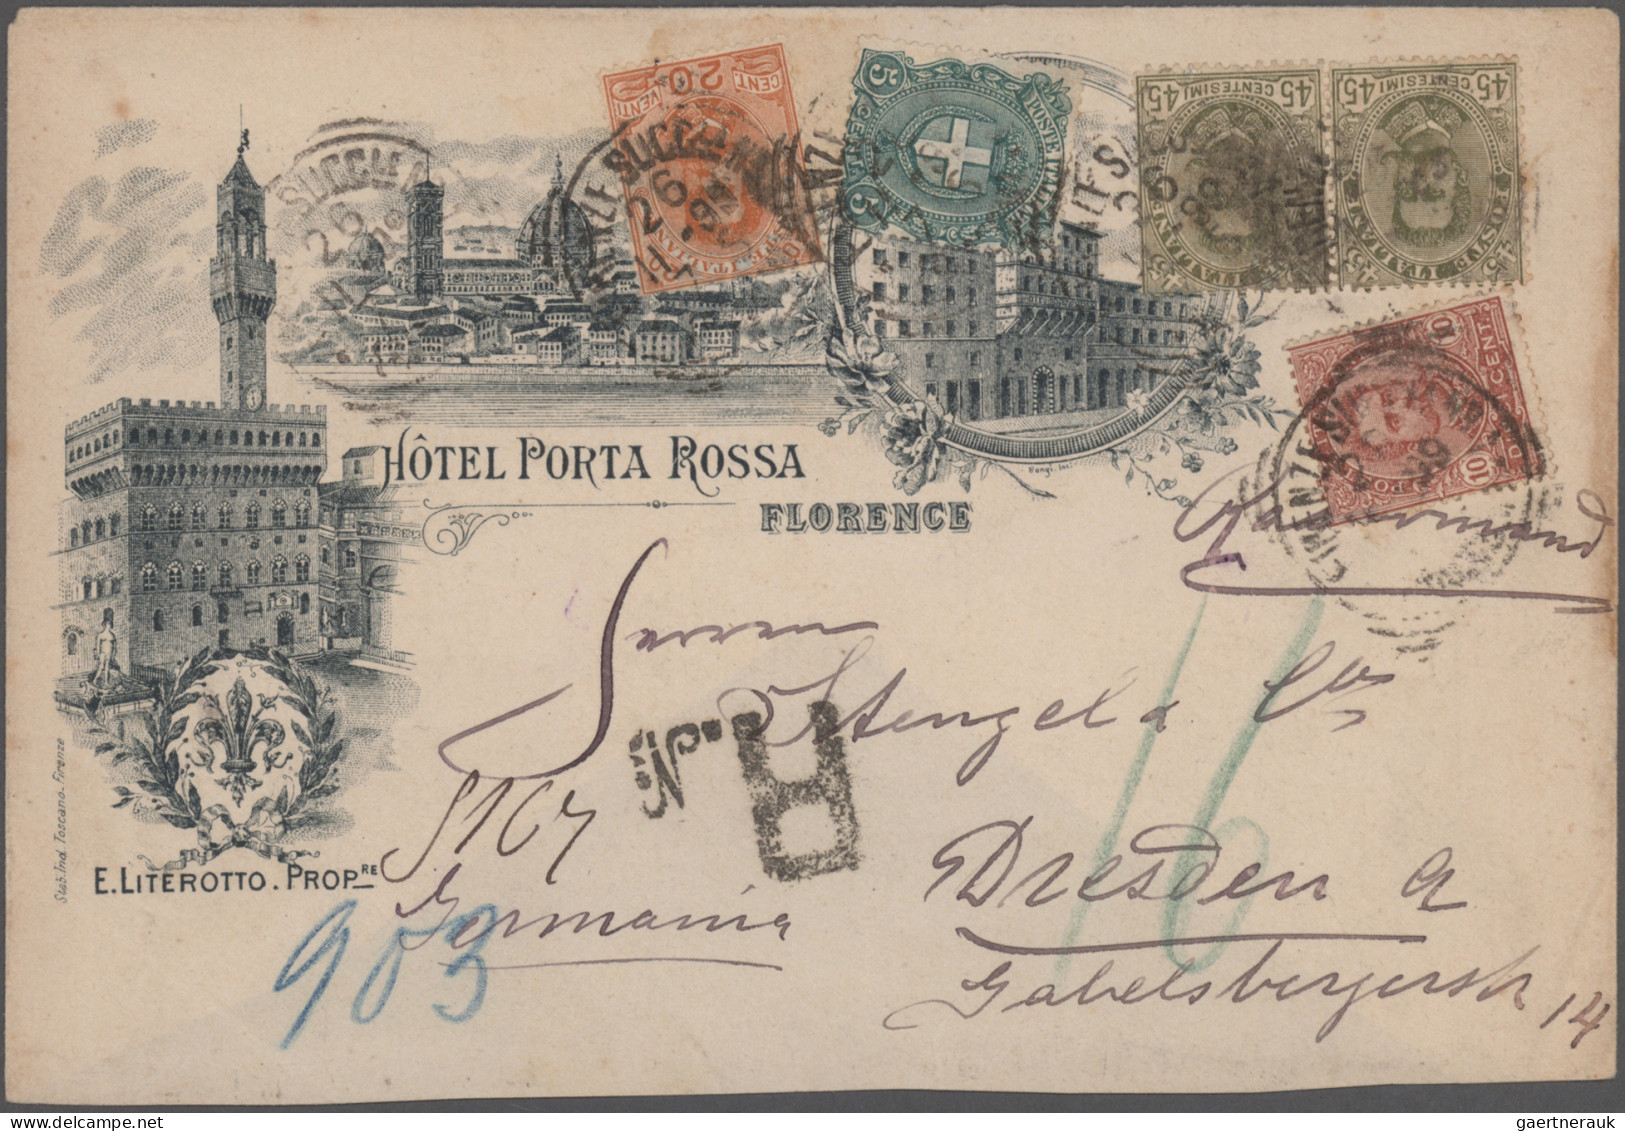 Italy: 1862/1897 ca., comprehensive collection with ca.200 stamps and more than